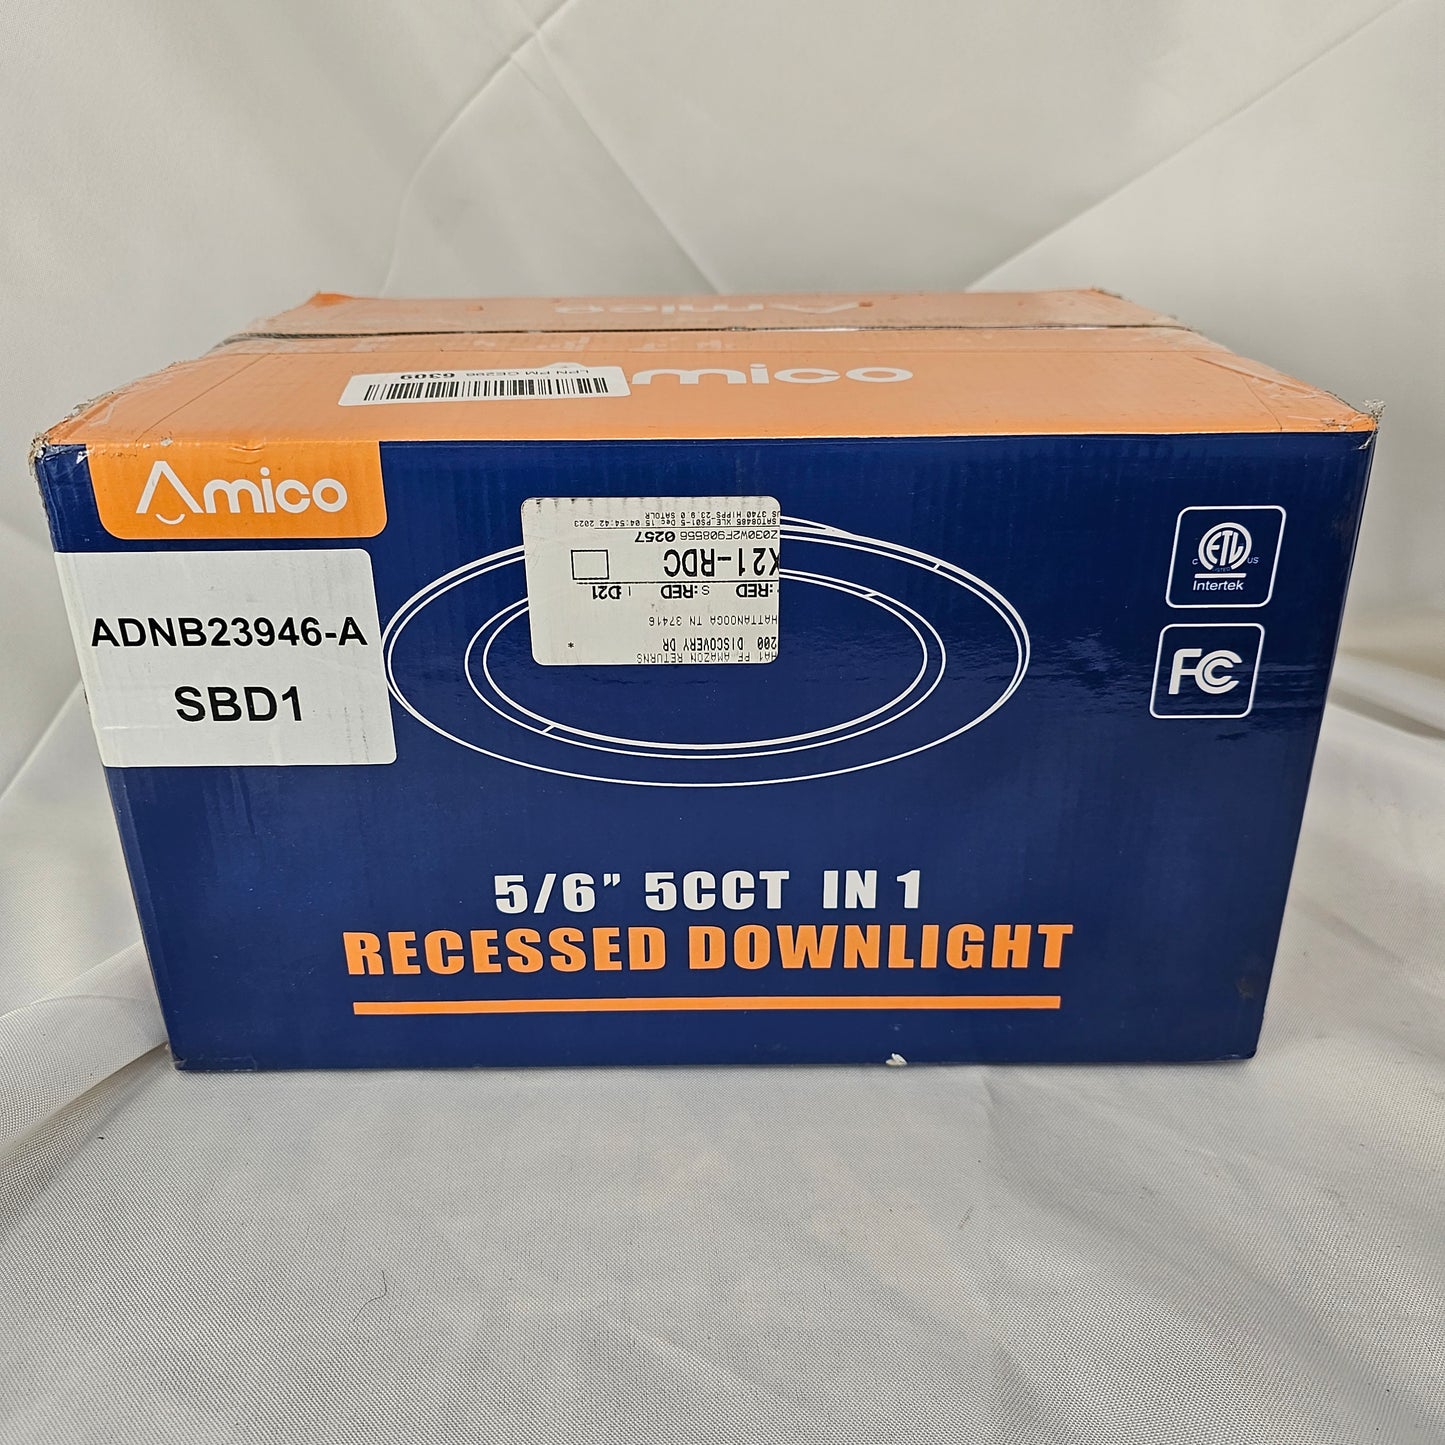 Recessed Downlight 12 Pack 5/6 Inch 5CCT In 1 Amico ADNB23946-A SBD1 - DQ Distribution